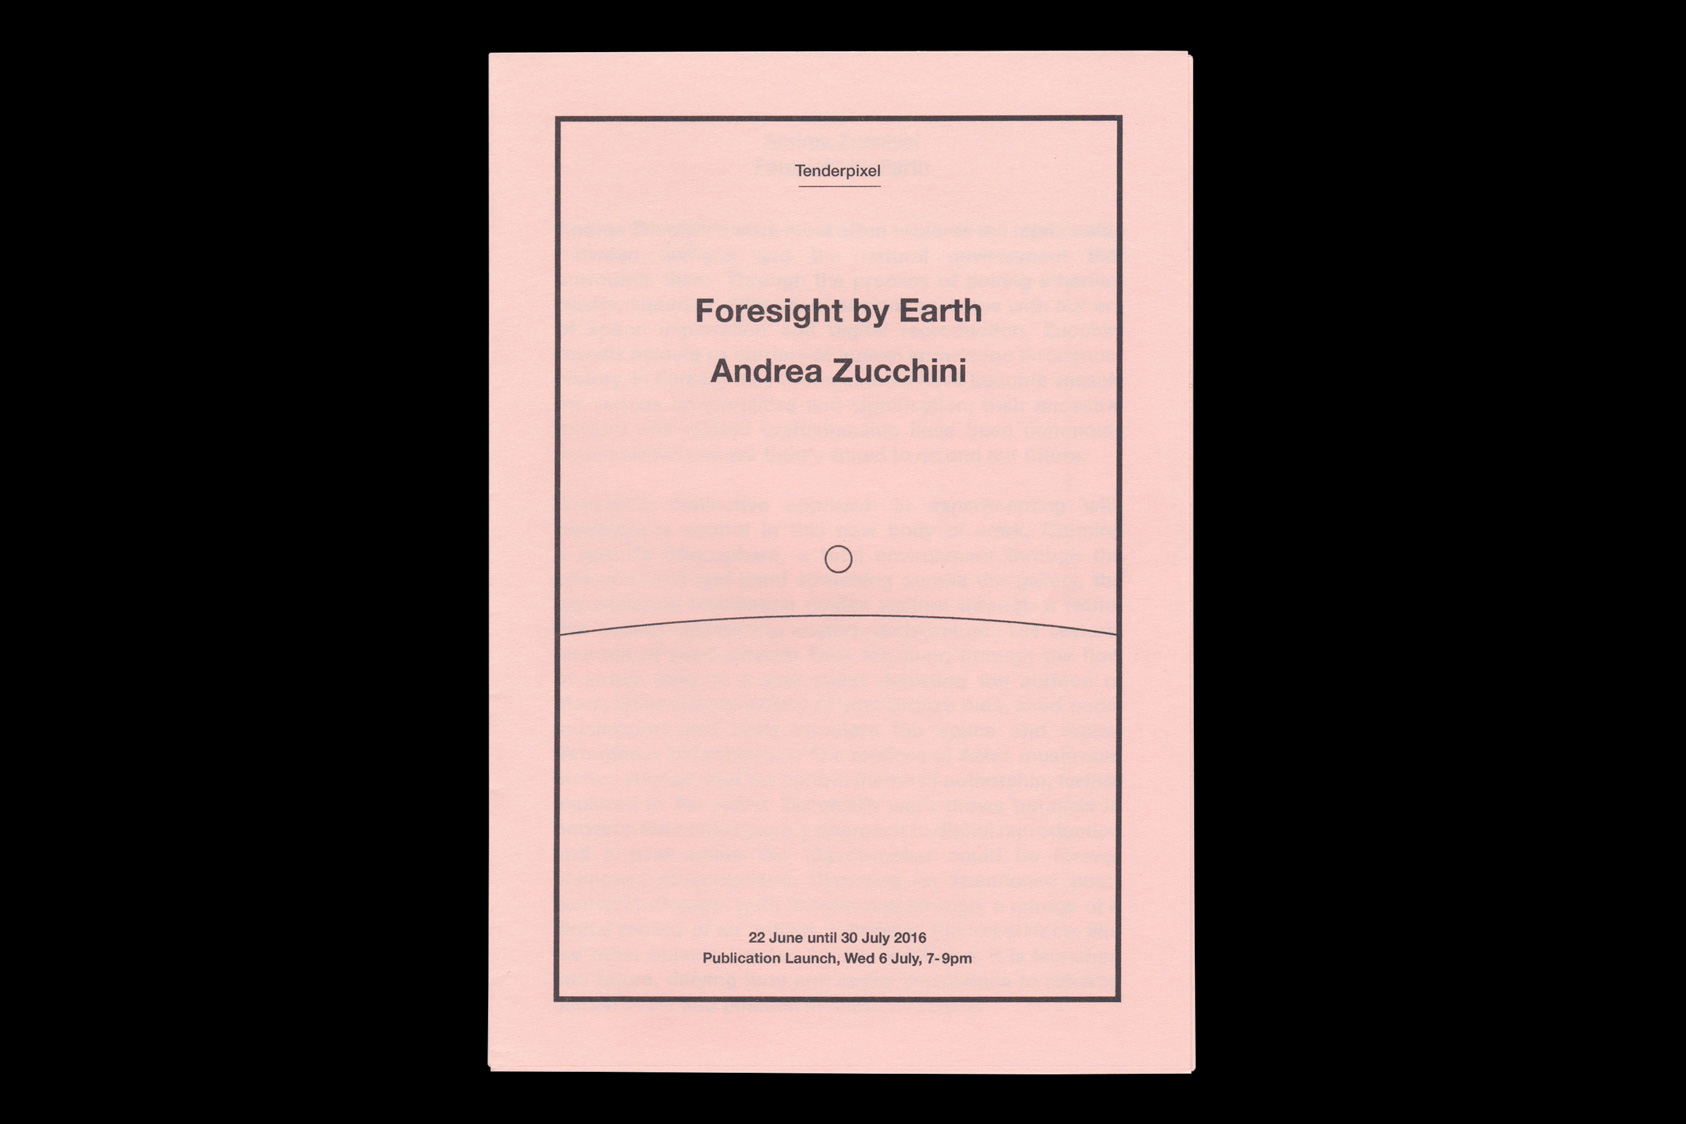 Foresight by Earth - exhibition handout for Tenderpixel, 2016 by the agency for emerging ideas